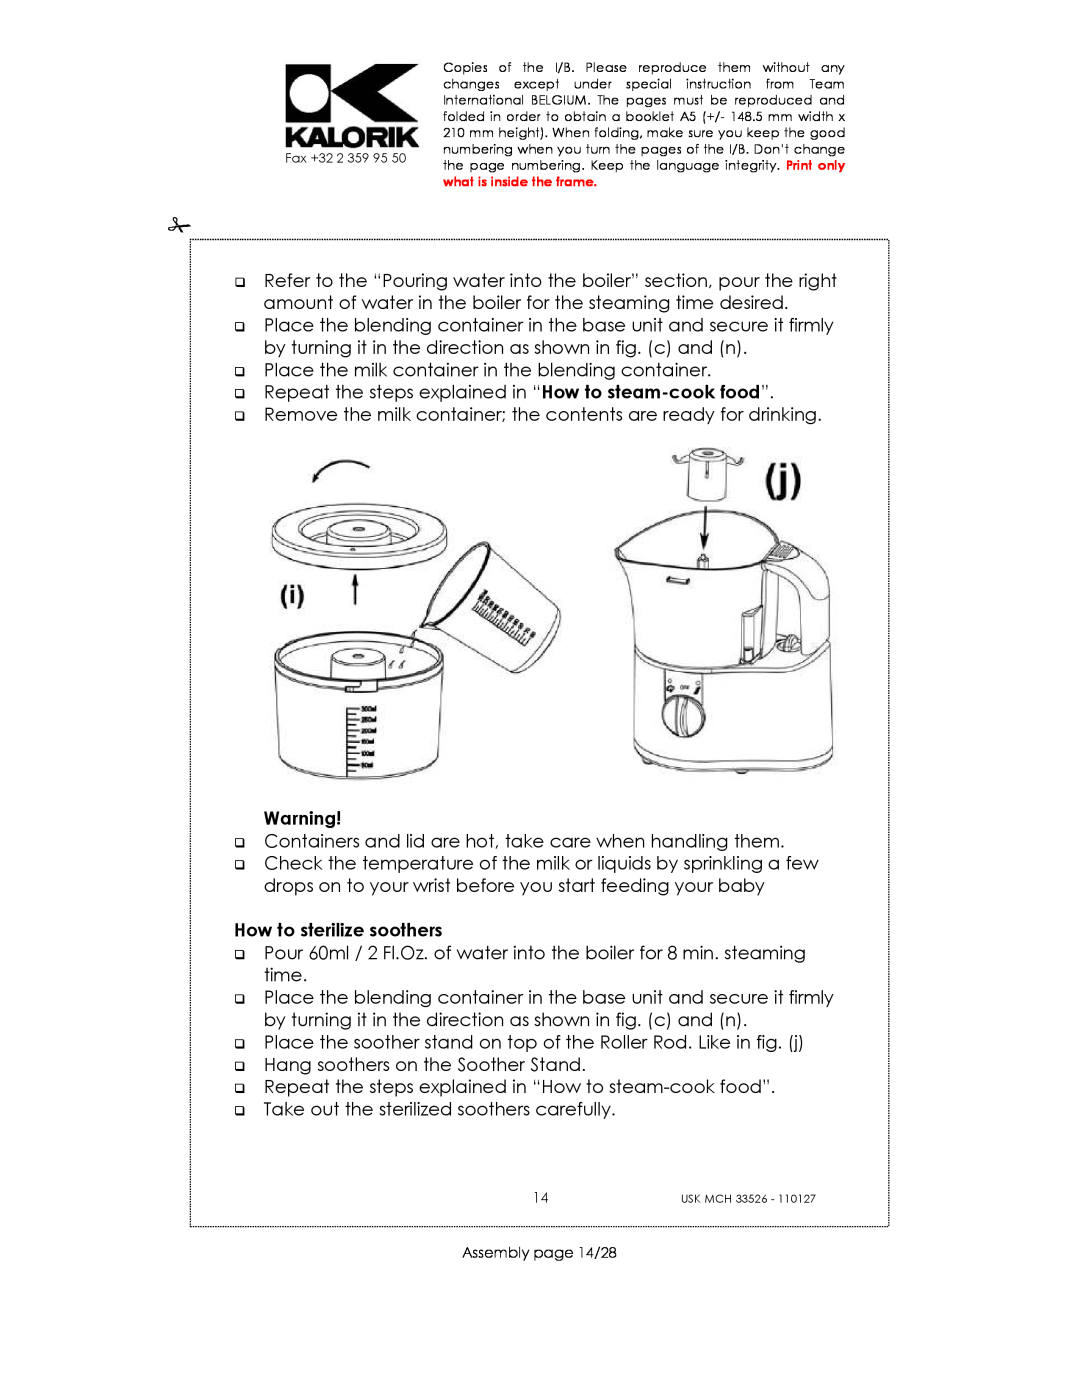 Kalorik USK MCH 33526 manual How to sterilize soothers, Assembly page 14/28 